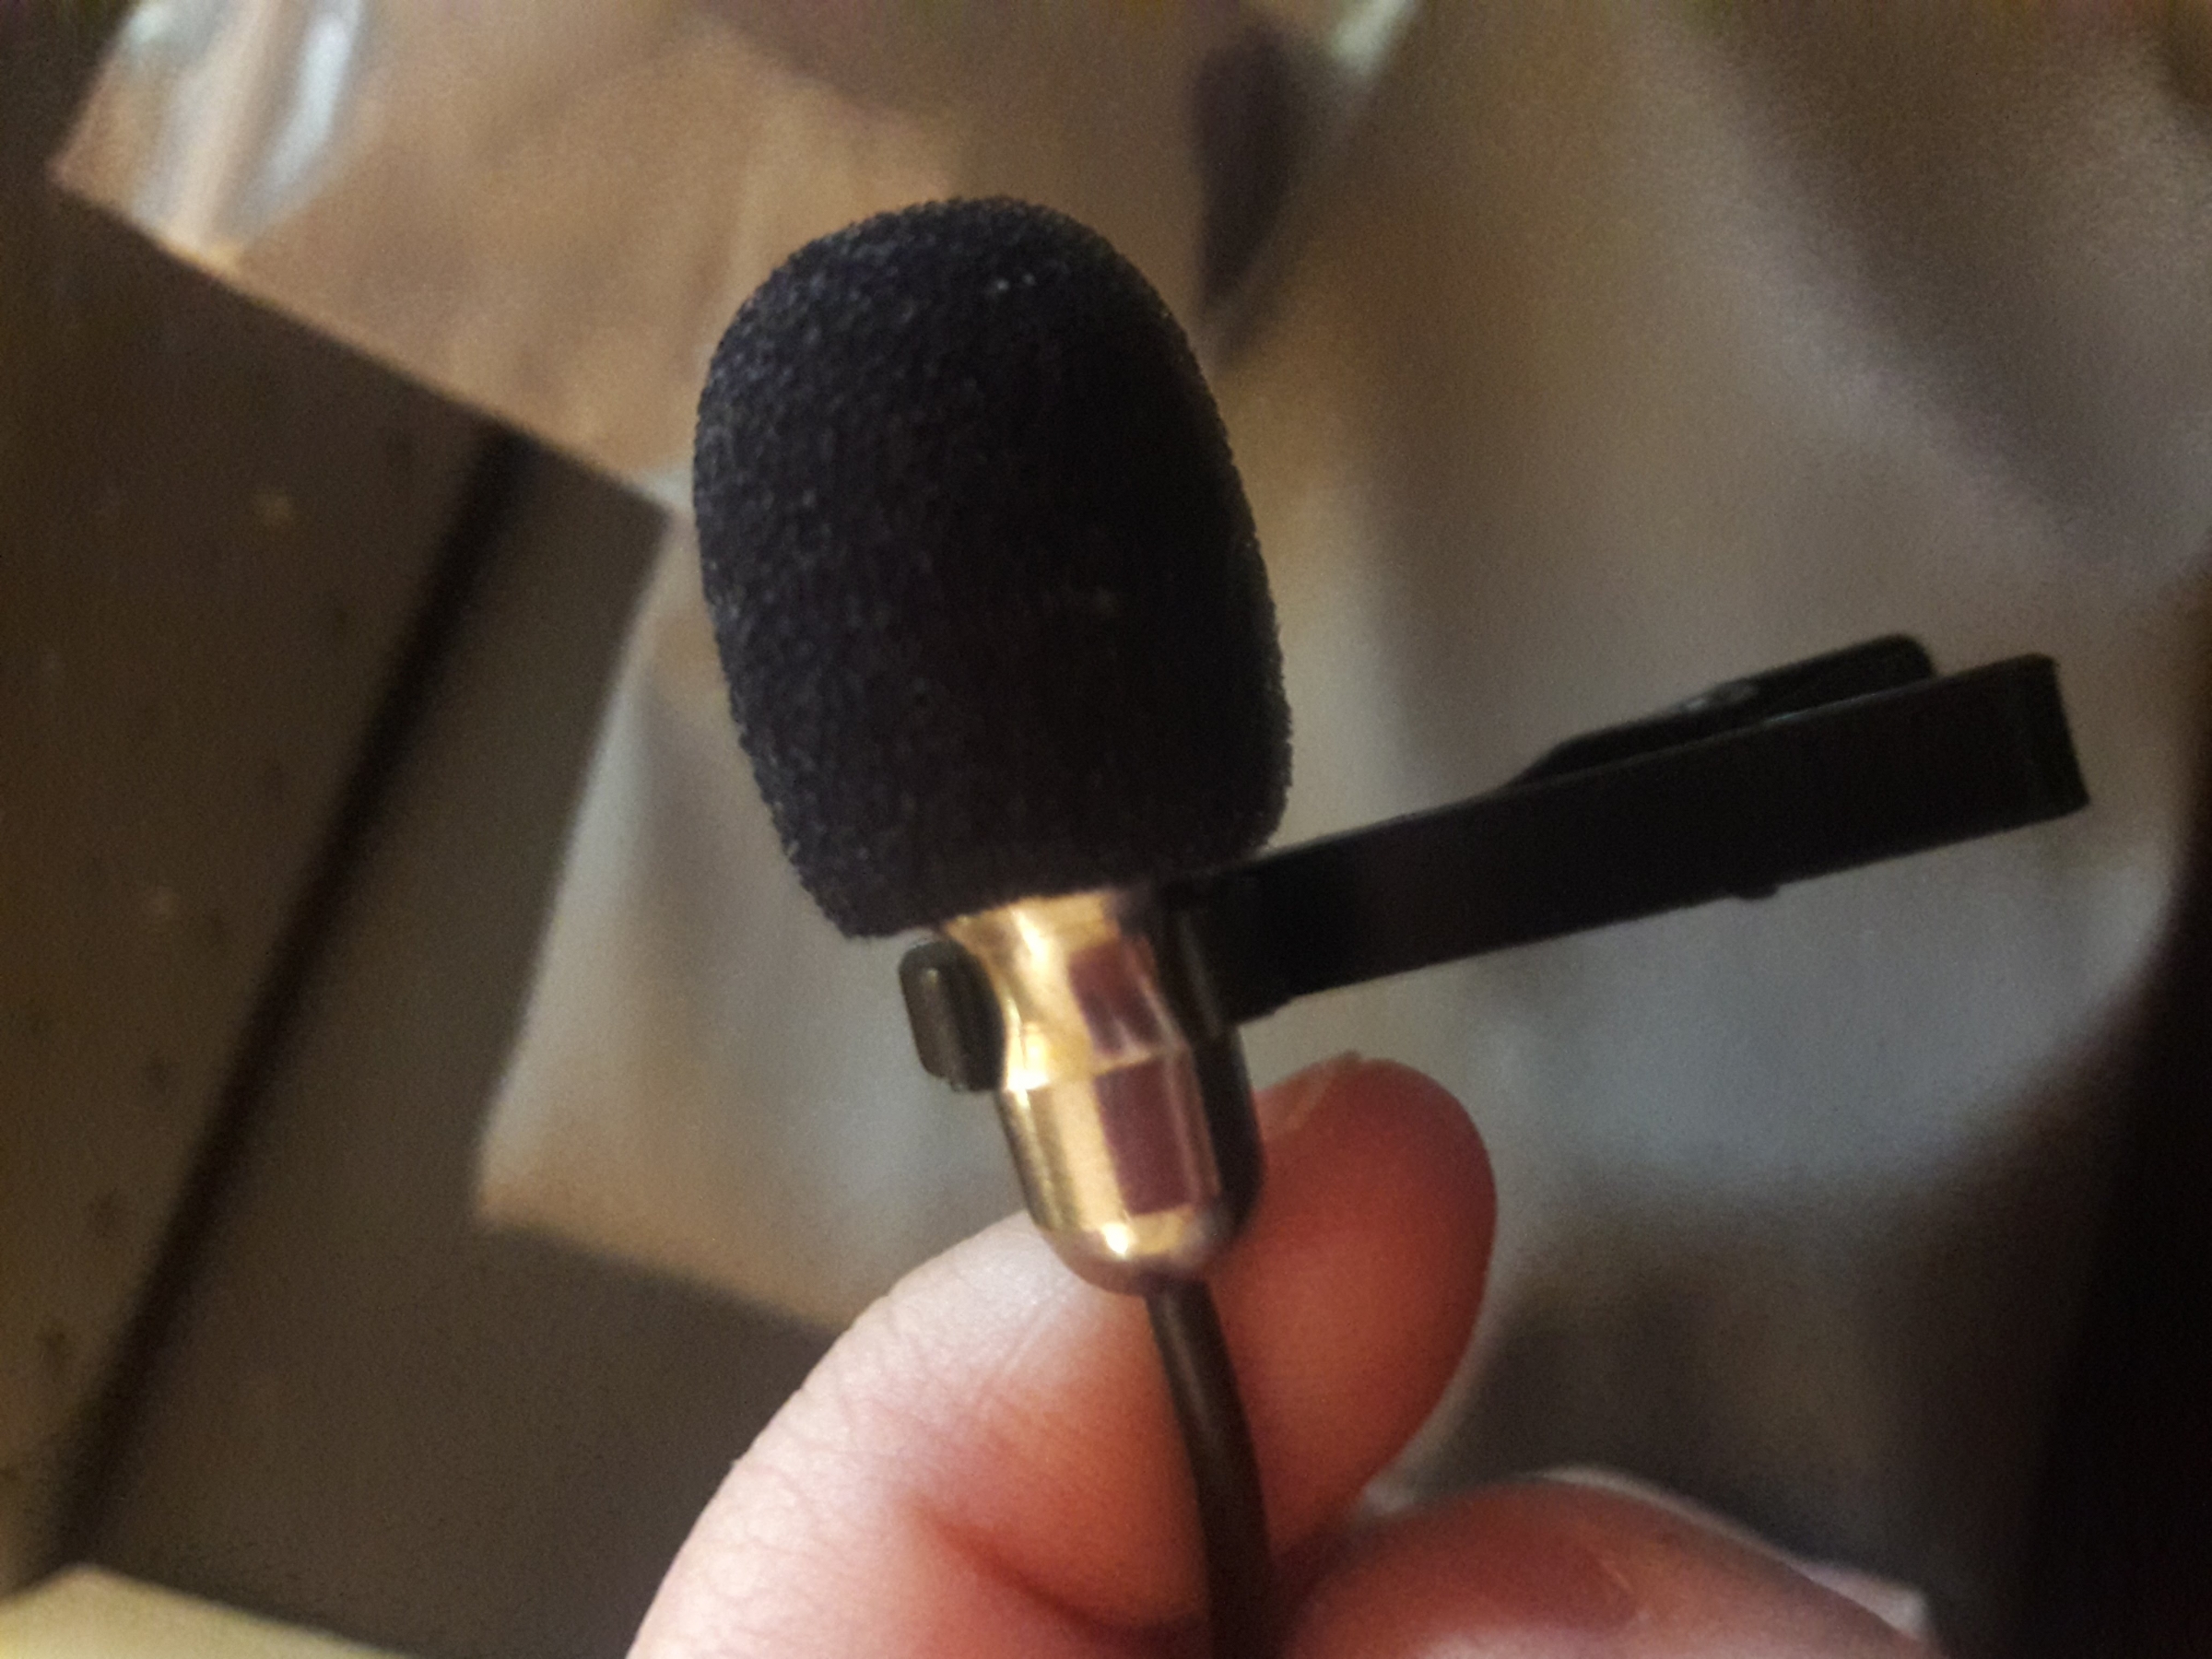 Better than my Astro A40's mic!